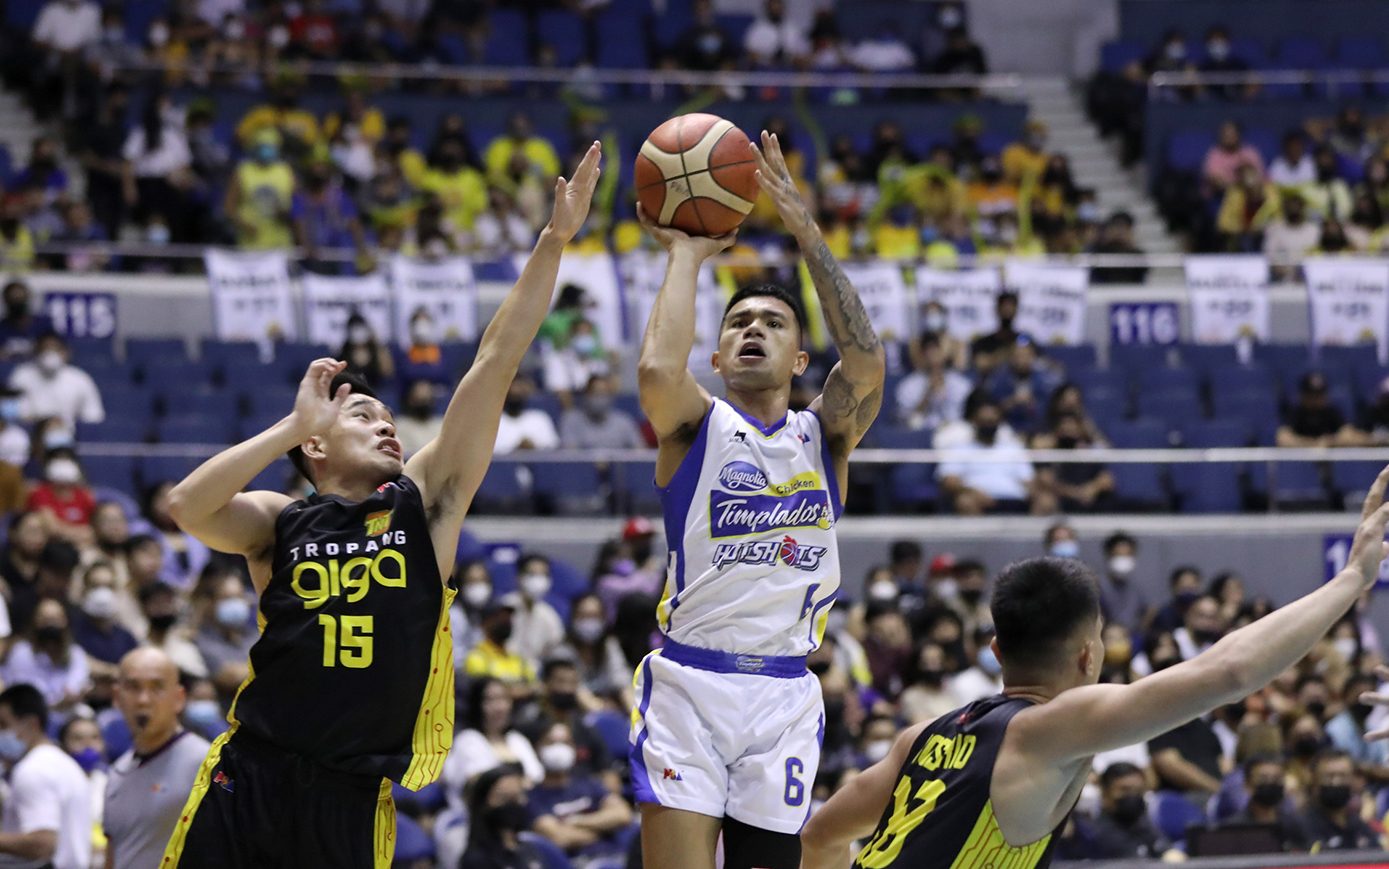 Battling injury, Jalalon shows up as Magnolia stays in title hunt